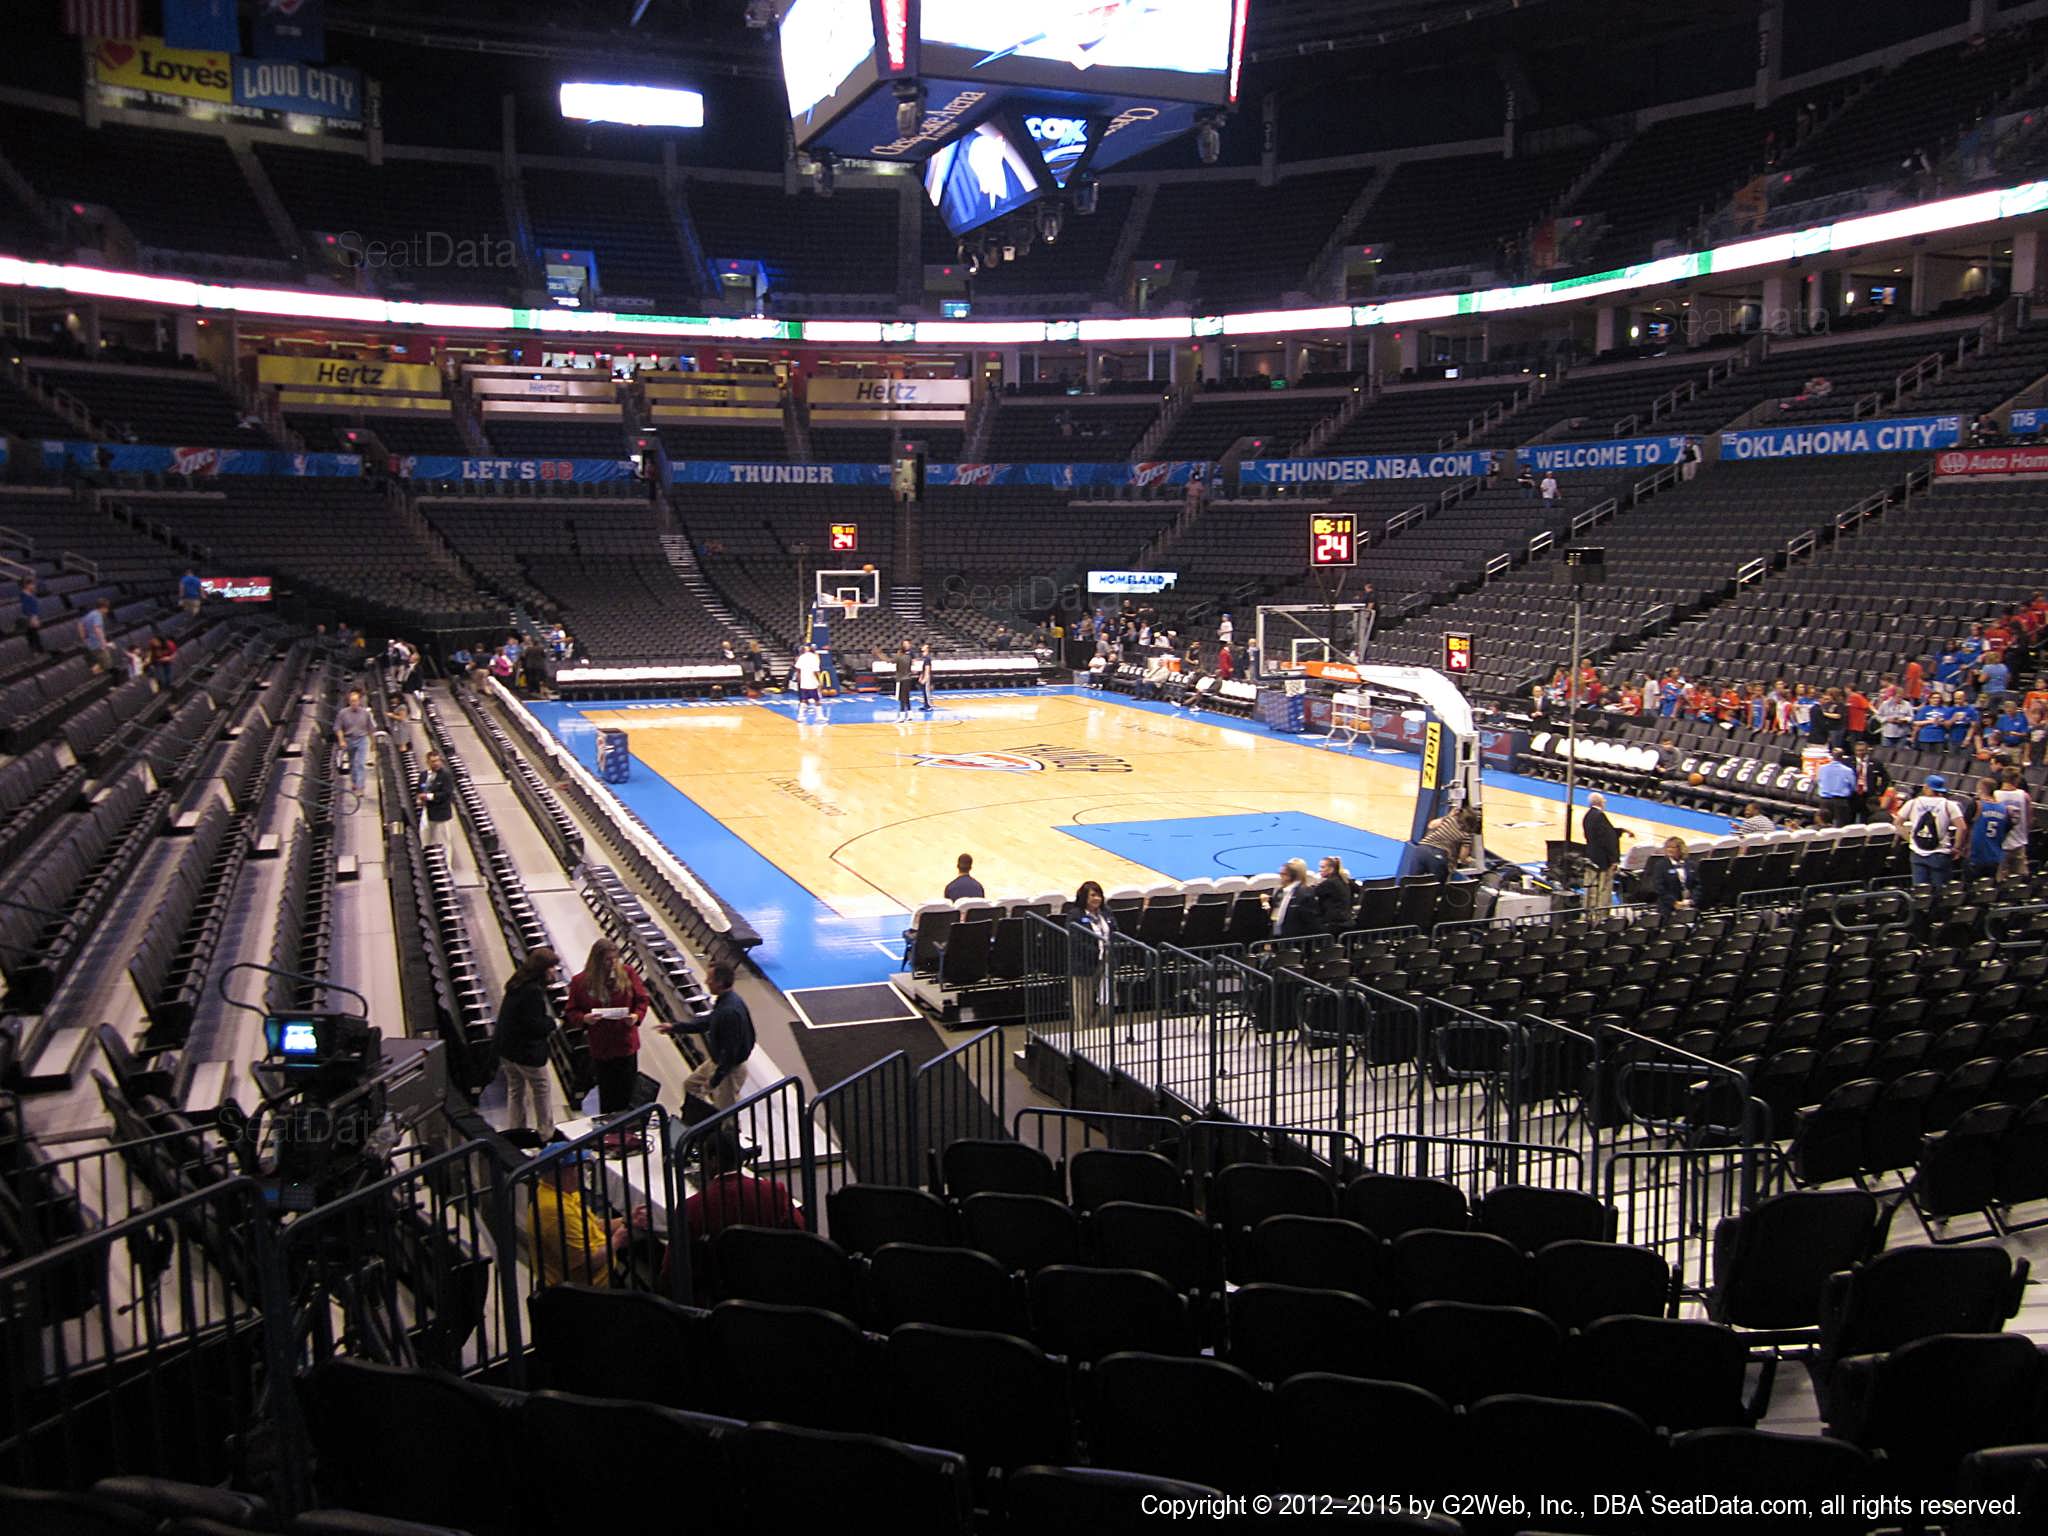 Seat view from section 102 at Chesapeake Energy Arena, home of the Oklahoma City Thunder